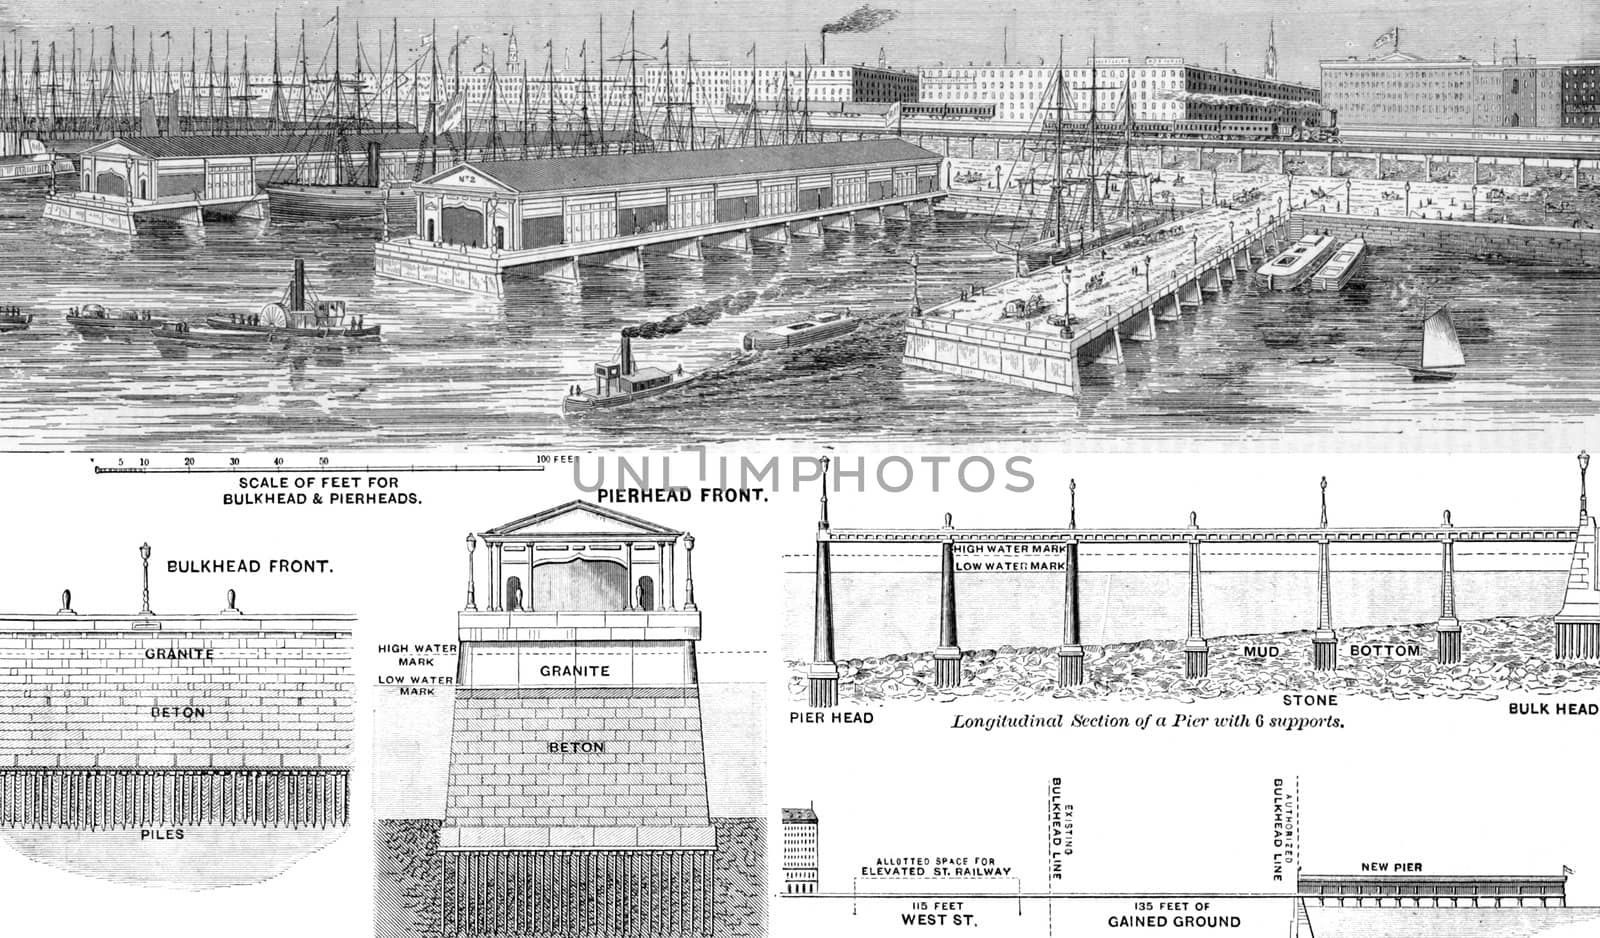 Proposed wharfage piers and improved front for the city of New York on engraving from 1884. Published in Knights new mechanical dictionary : a description of tools, instruments, machines, processes and engineering.